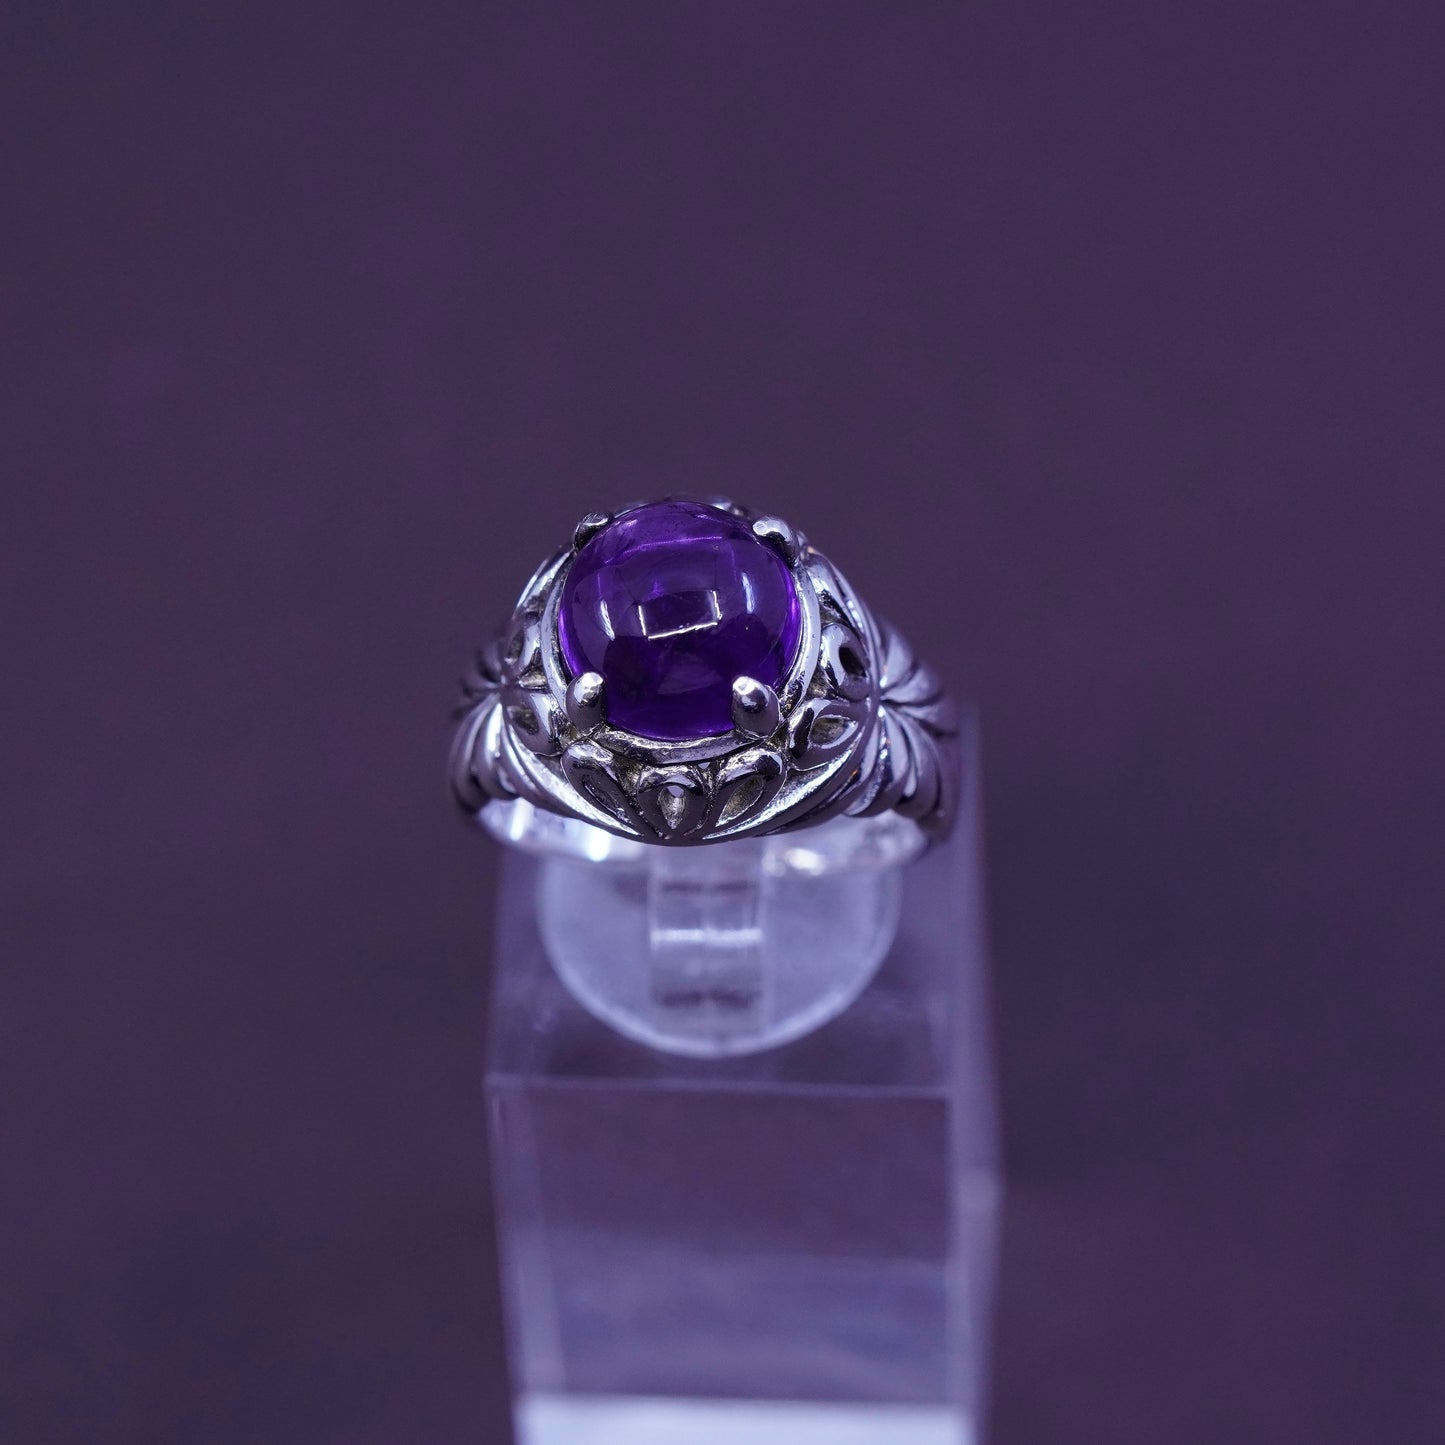 Size 8.25, vintage SLC filigree Sterling 925 silver handmade ring with amethyst